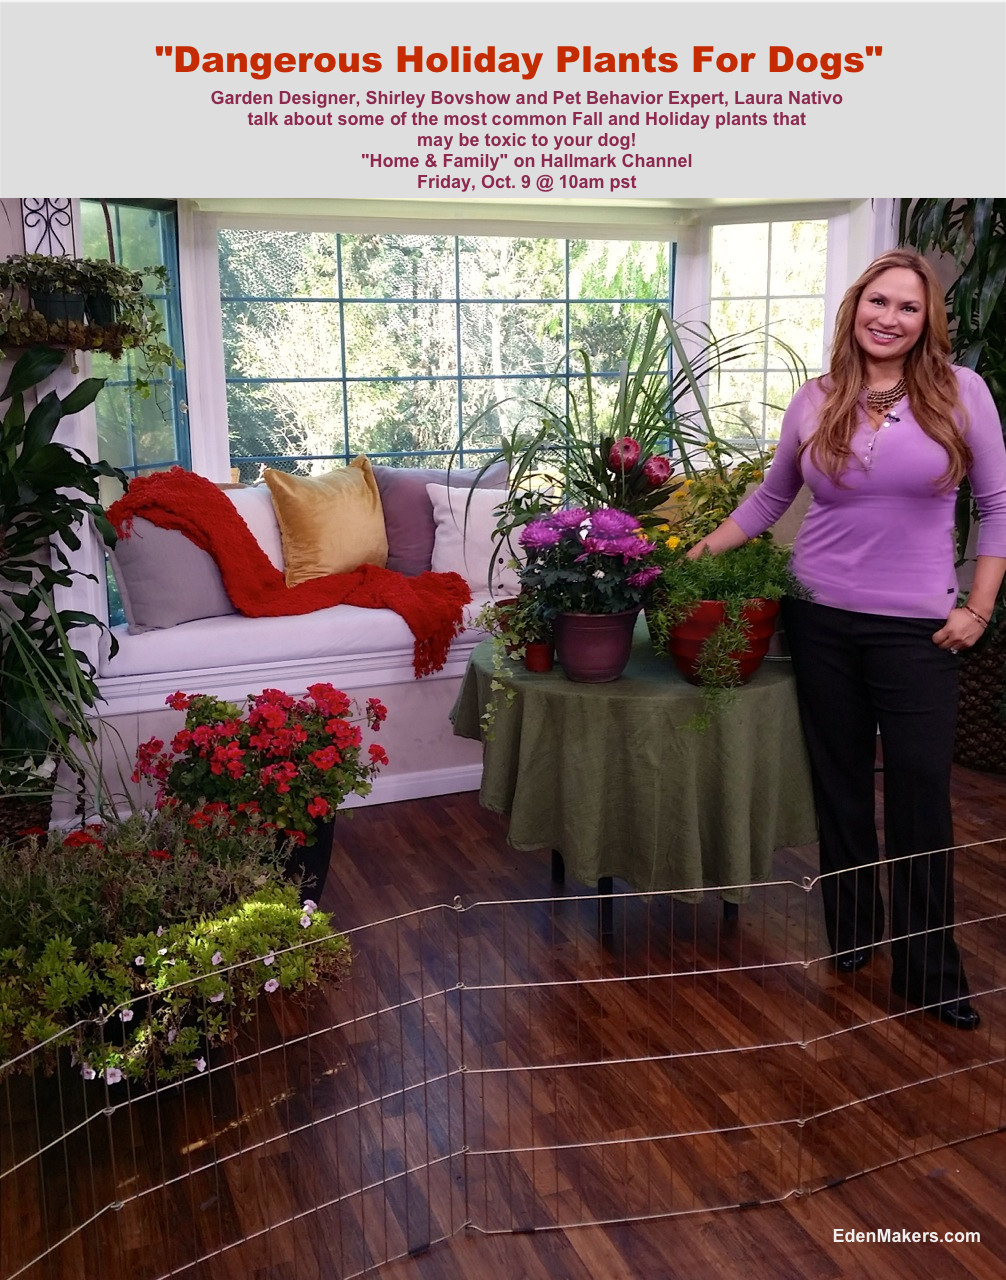 garden-designer-shirley-bovshow-expert-poisonous-holiday-plants-in-fall-home-and-family-show-hallmark-channel-edenmakers-blog